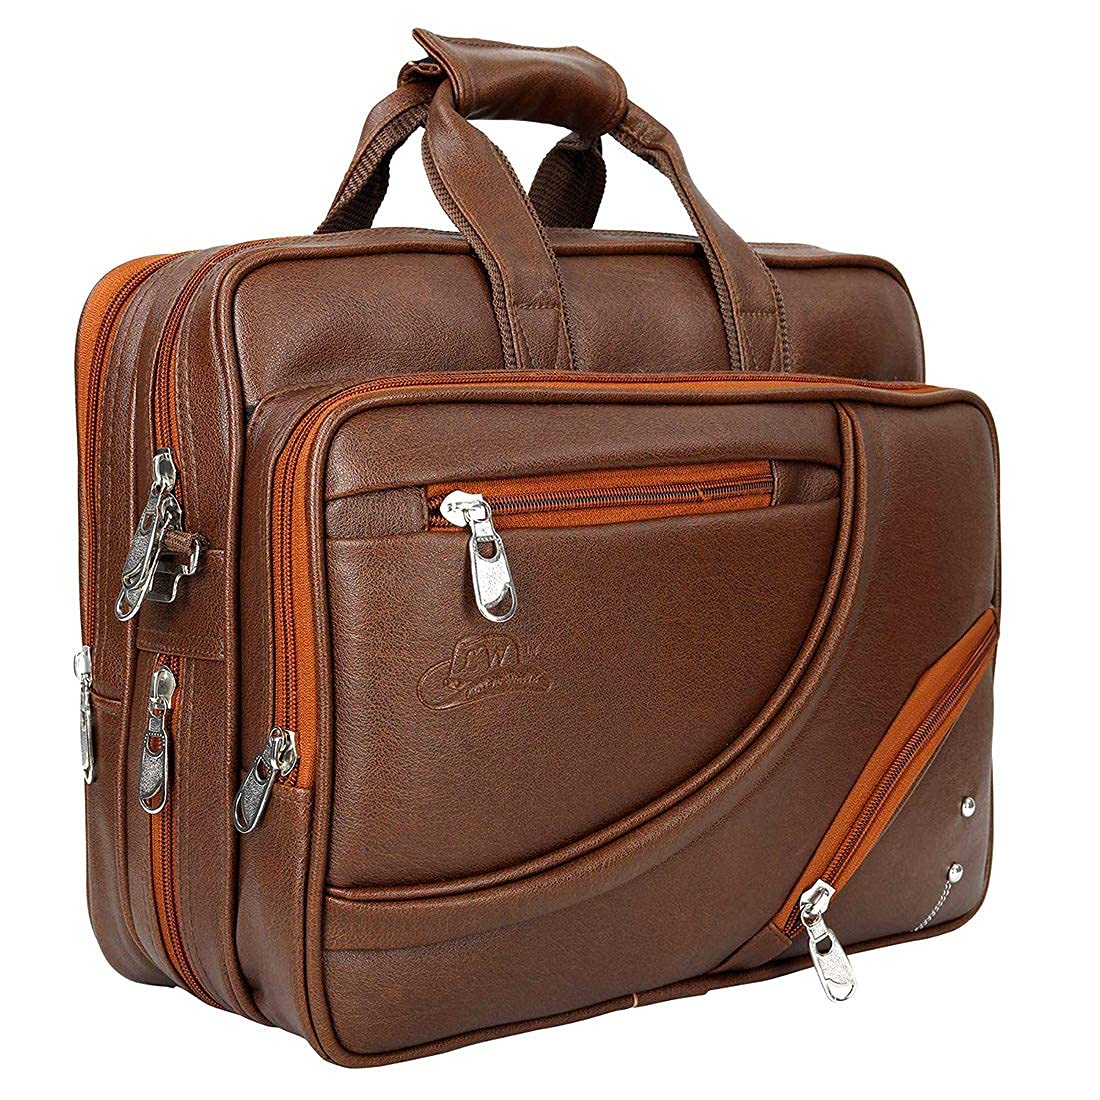 Leather World Pu Expandable 16 inch Water Resistant Laptop Office Business Bag Men Women Messenger Briefcase - Tan